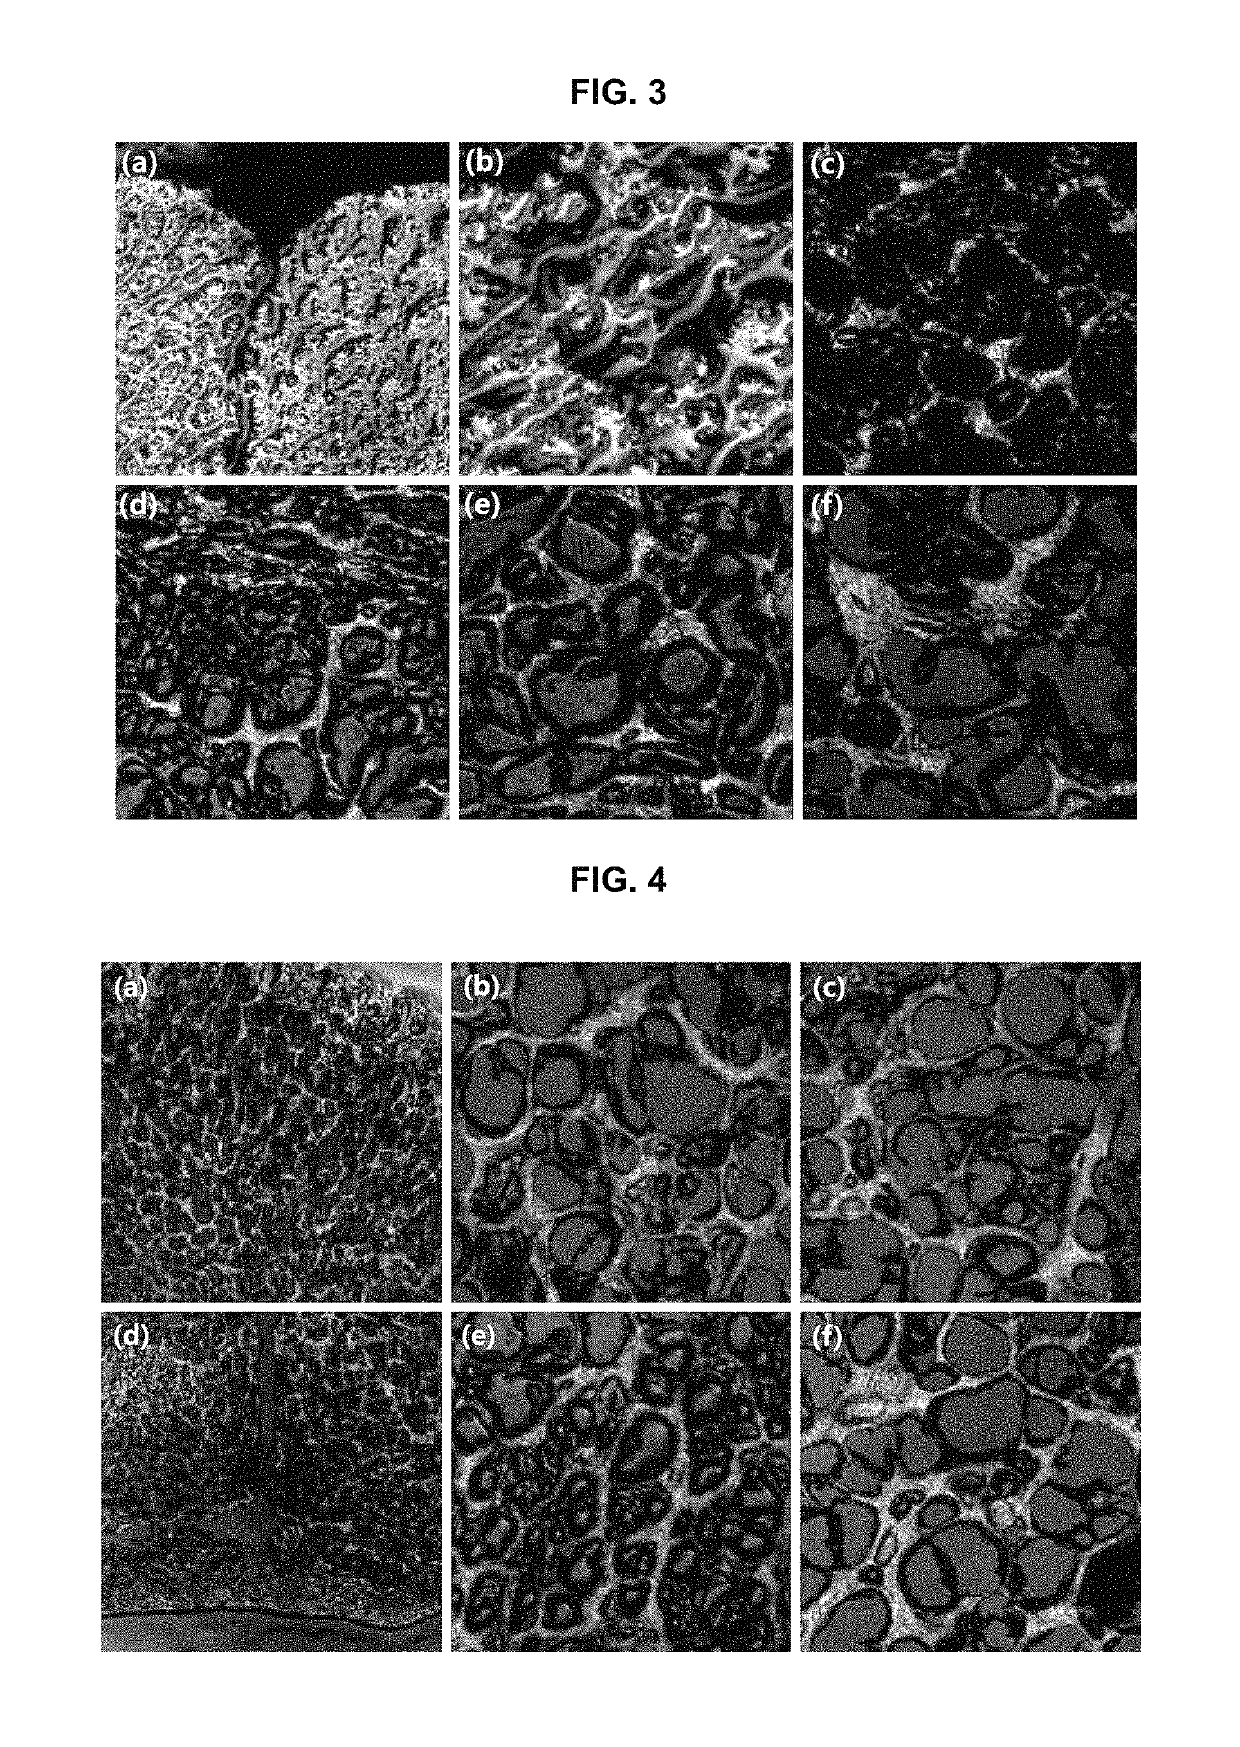 Composition for preventing, ameliorating, or treating neurological disease containing osmotin peptide as active ingredient